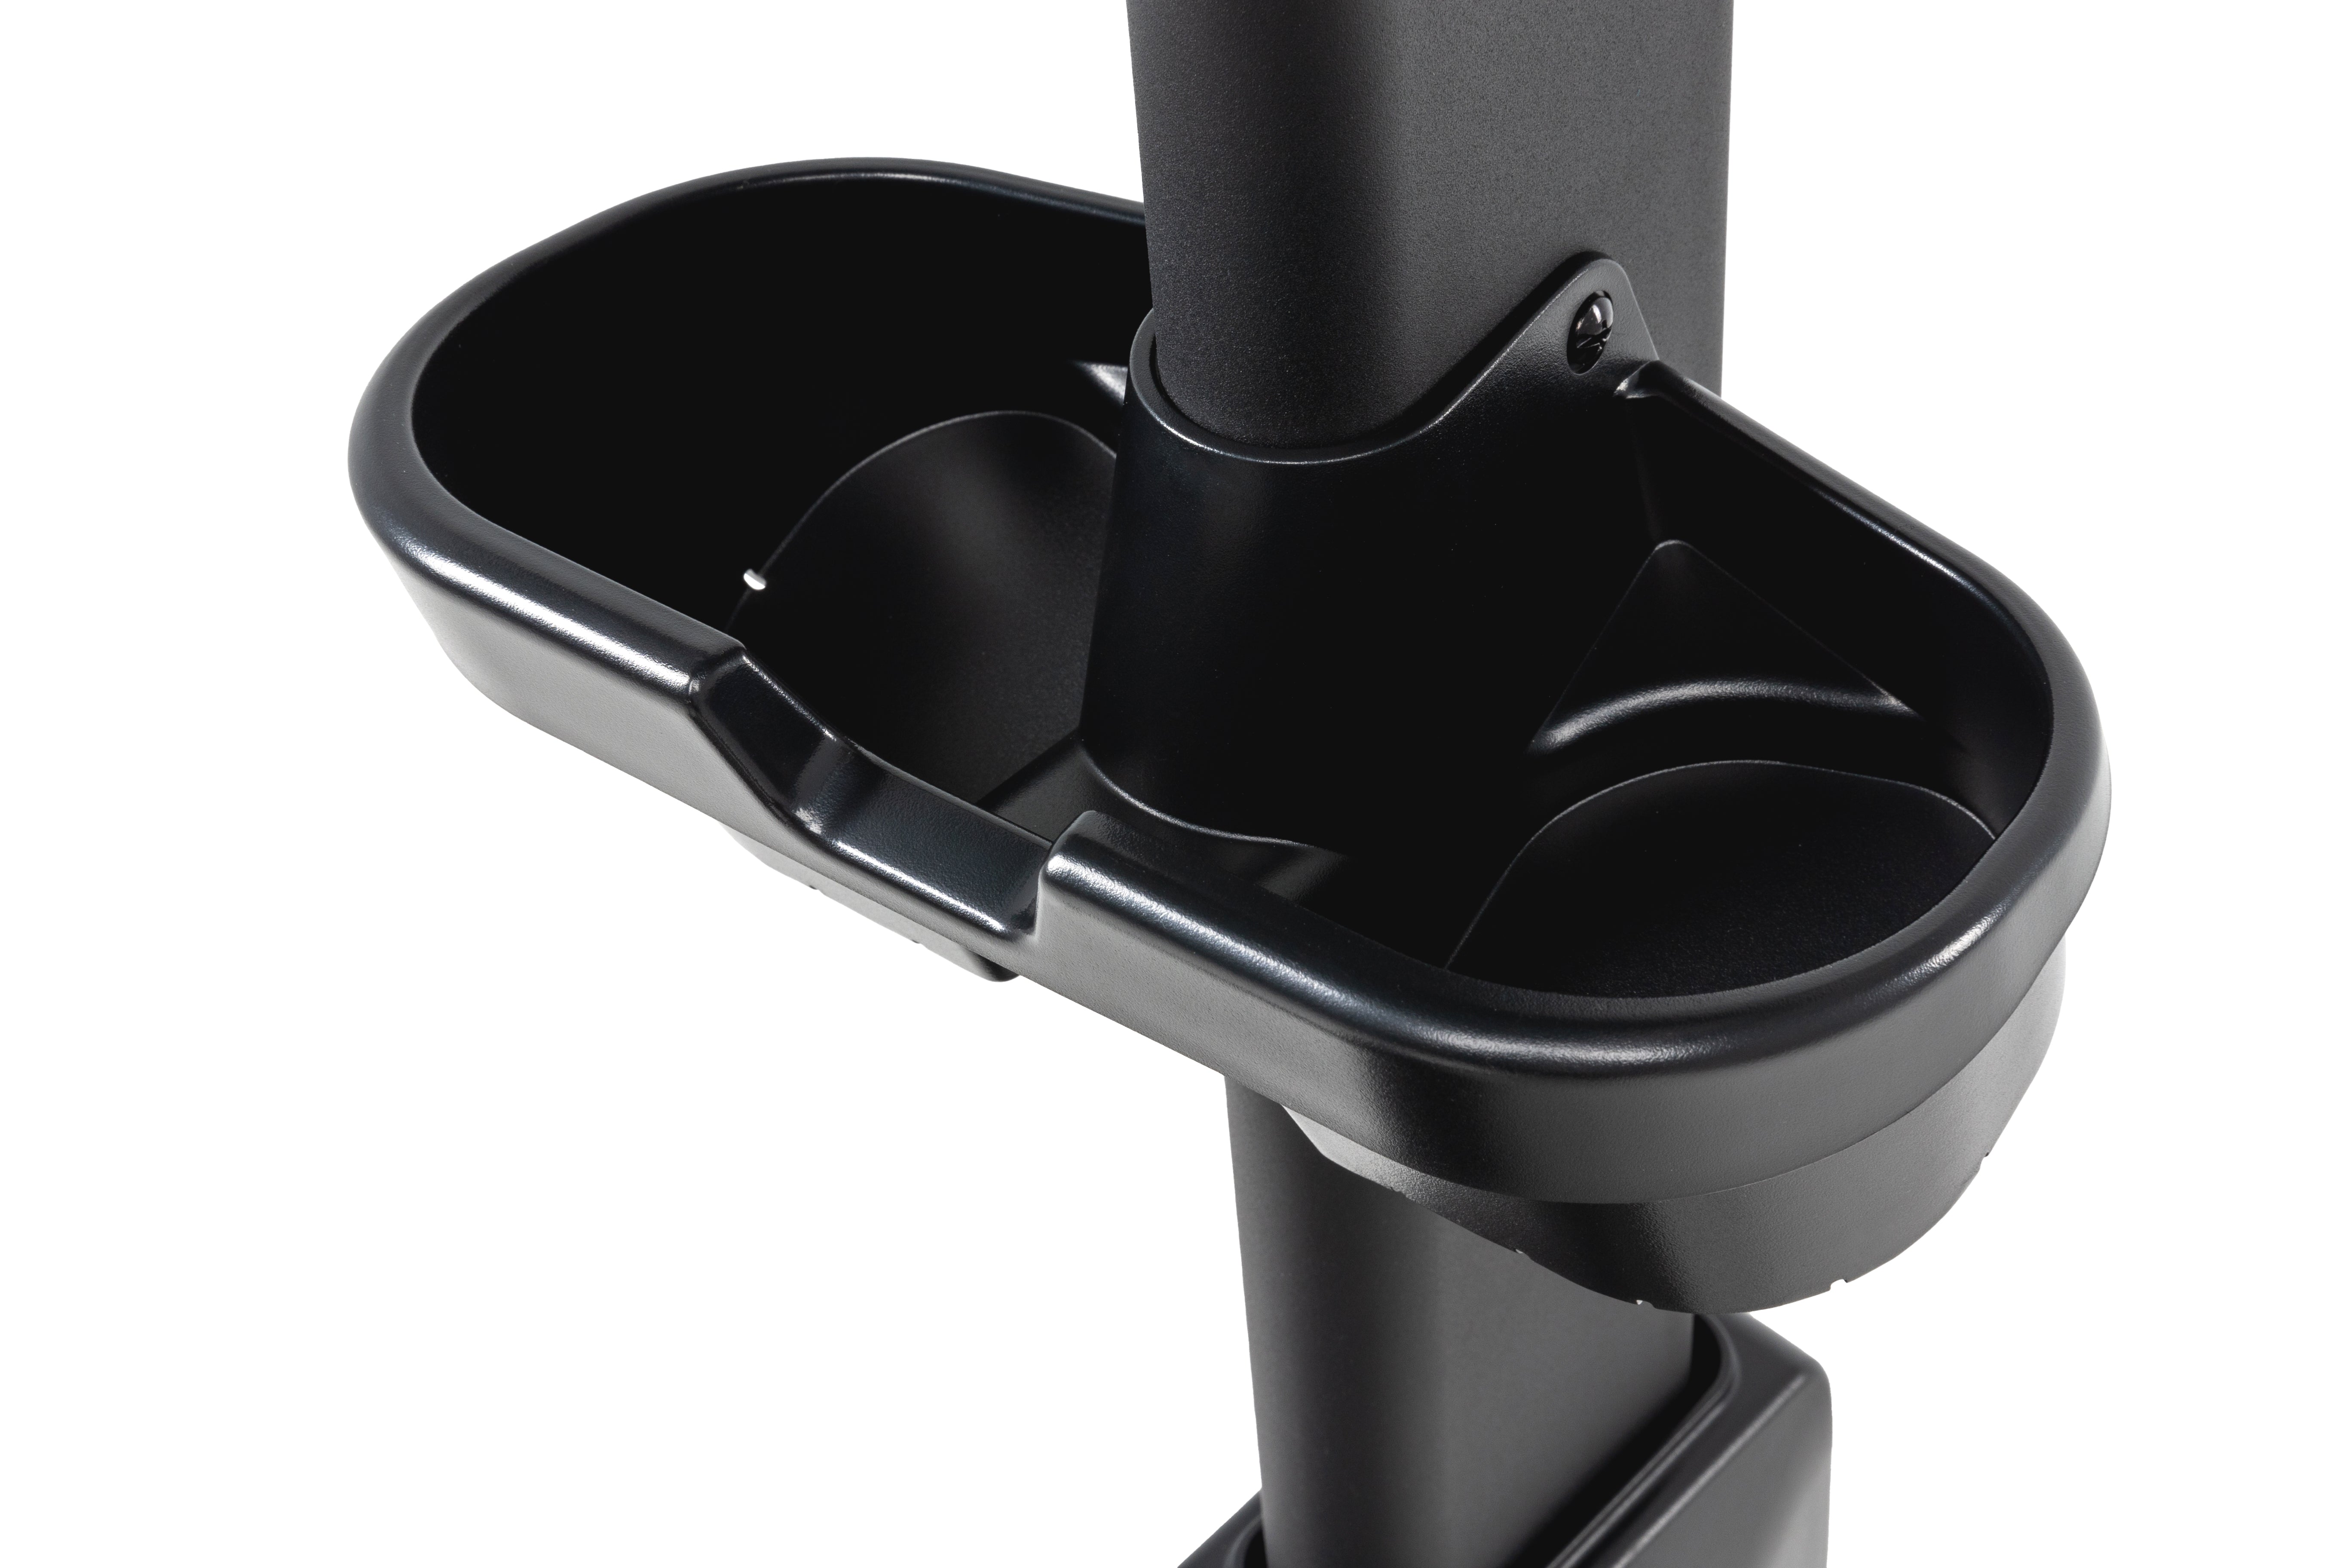 Close-up view of the Sole B94 exercise machine's black cup holder with a partition and glossy finish, attached to a matte pole.